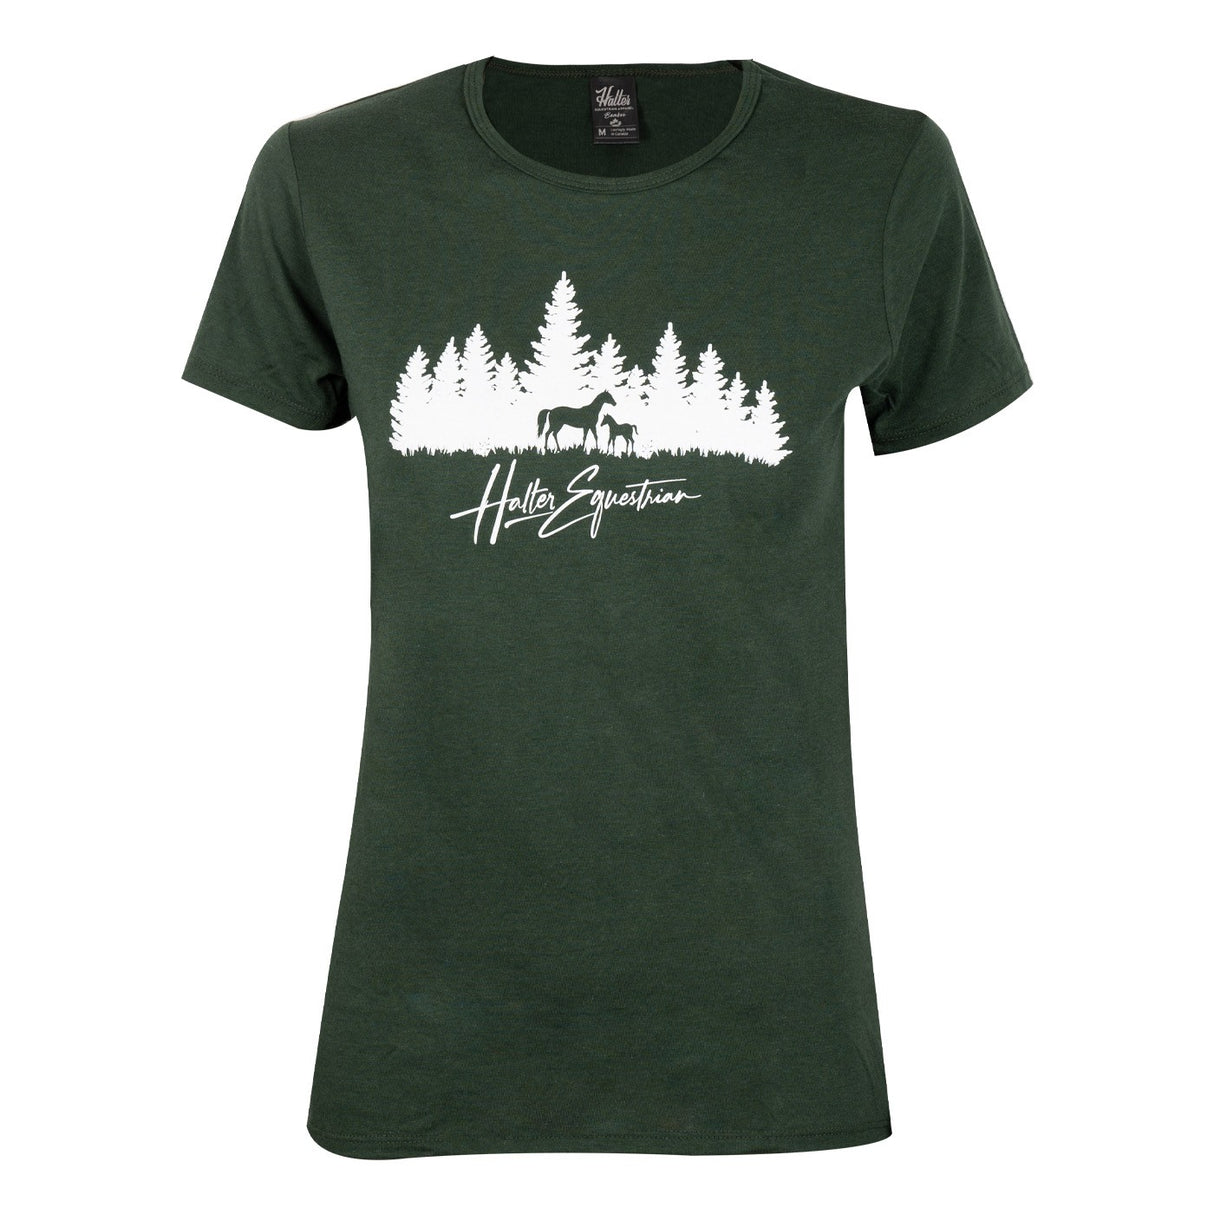 Halter Equestrian Bamboo Forest Filly Tee